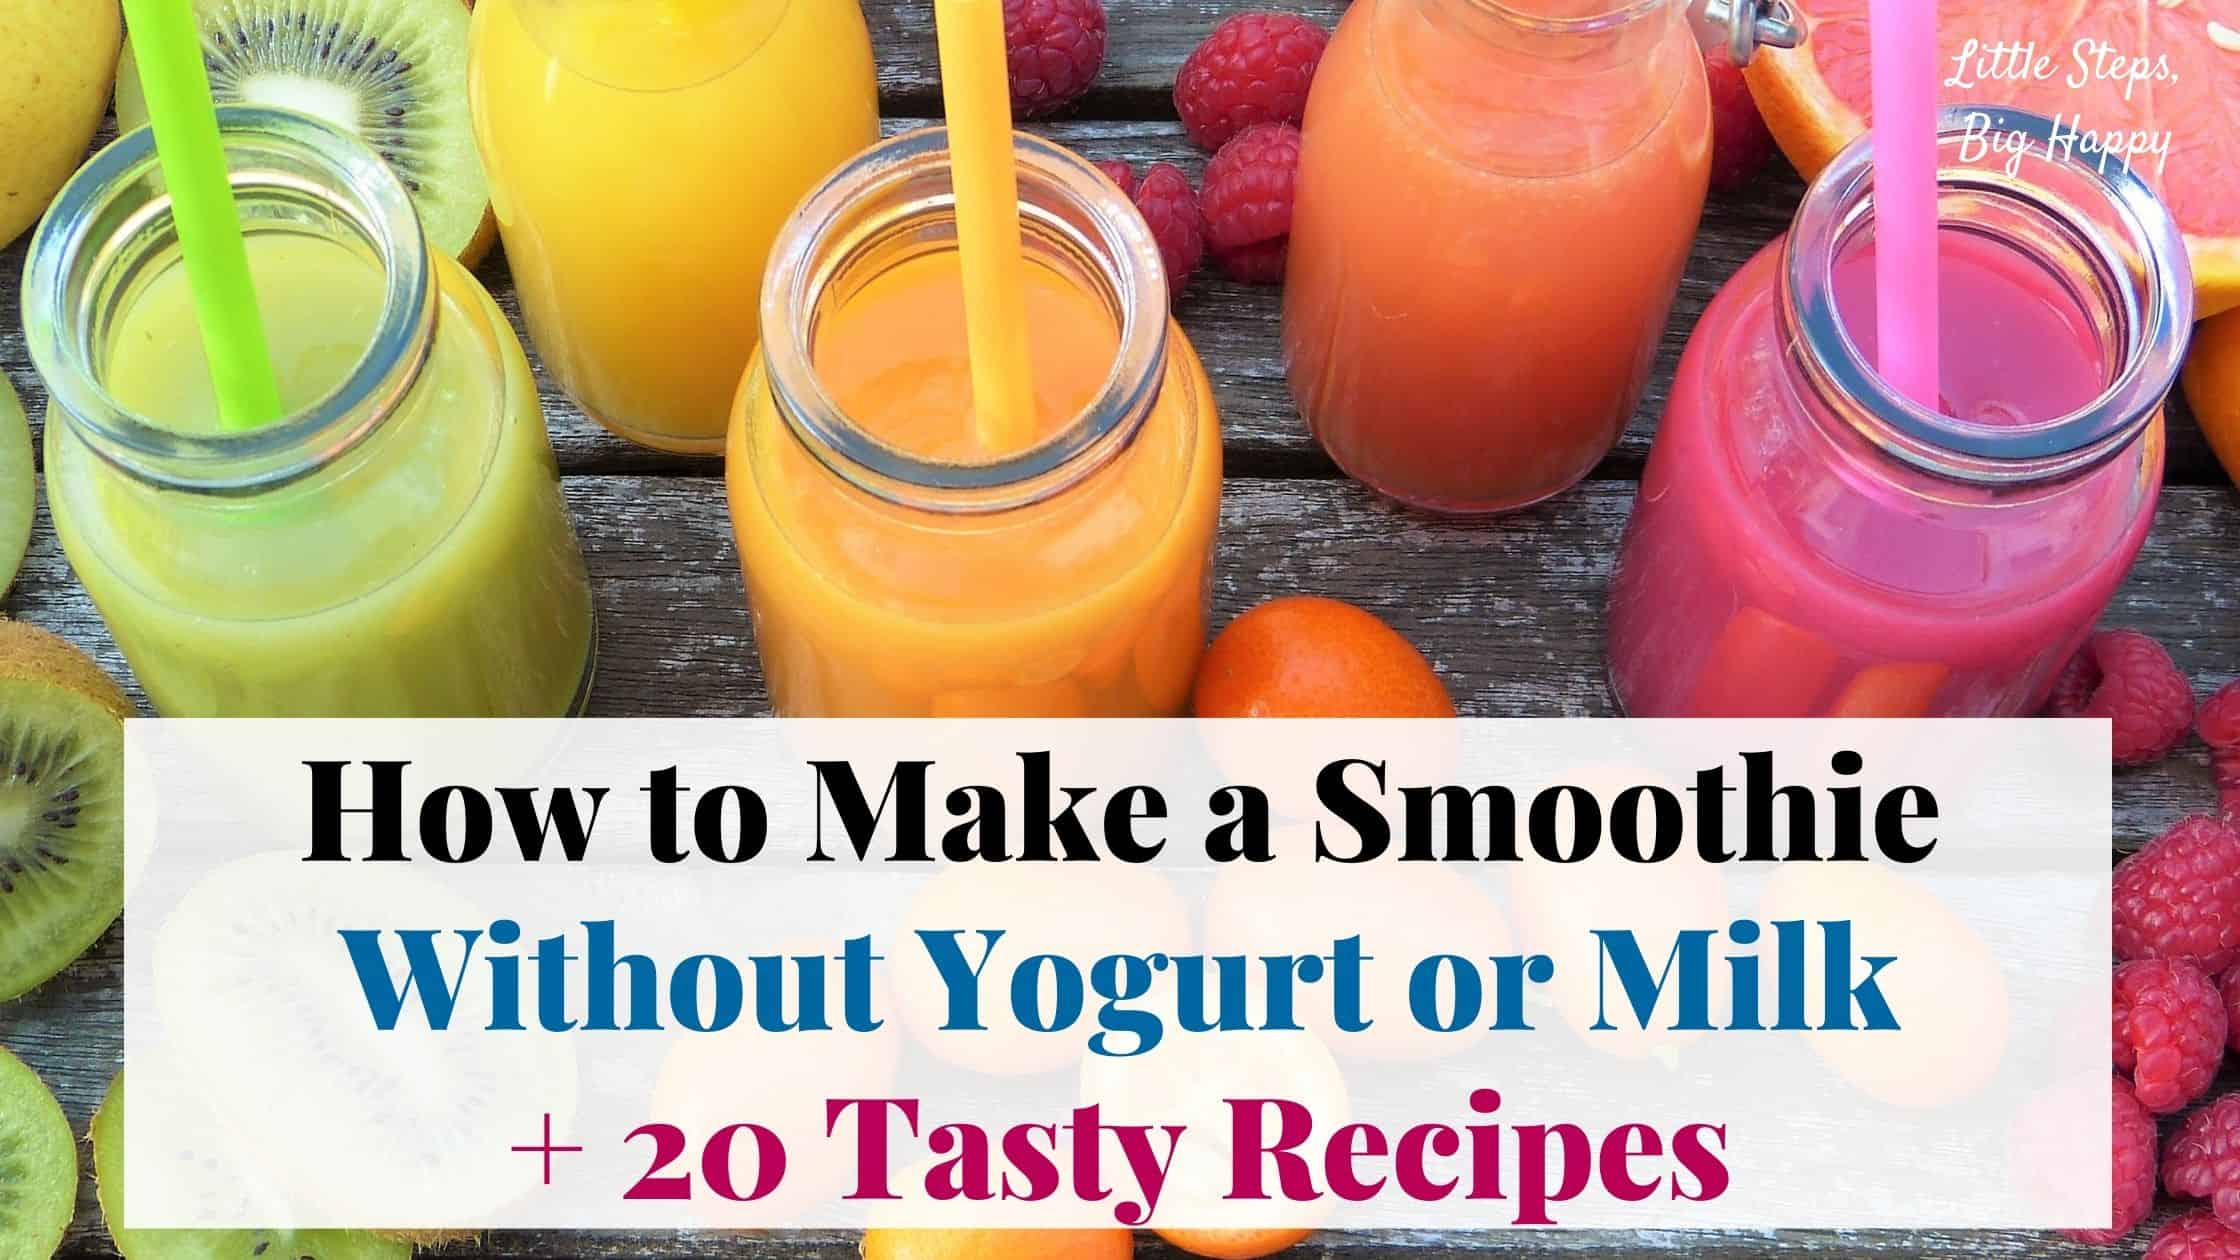 How to Make a Smoothie Without Yogurt or Milk + 20 Tasty Recipes